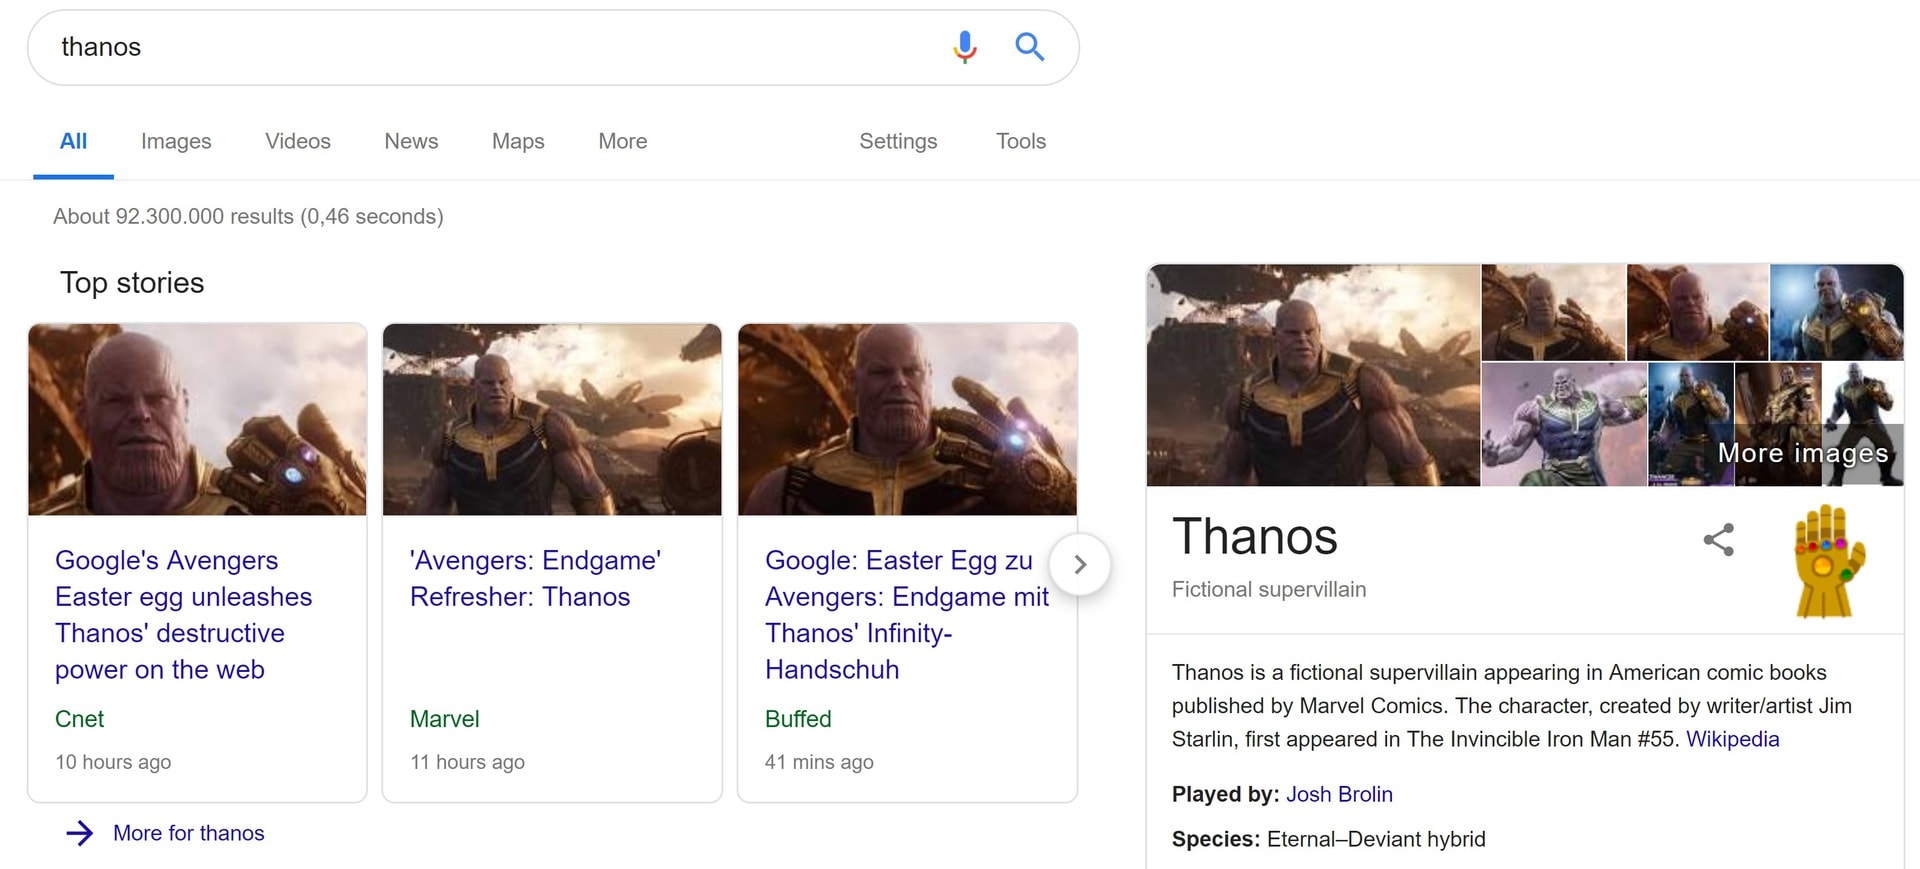 The Google search page after searching for &quot;Thanos&quot;